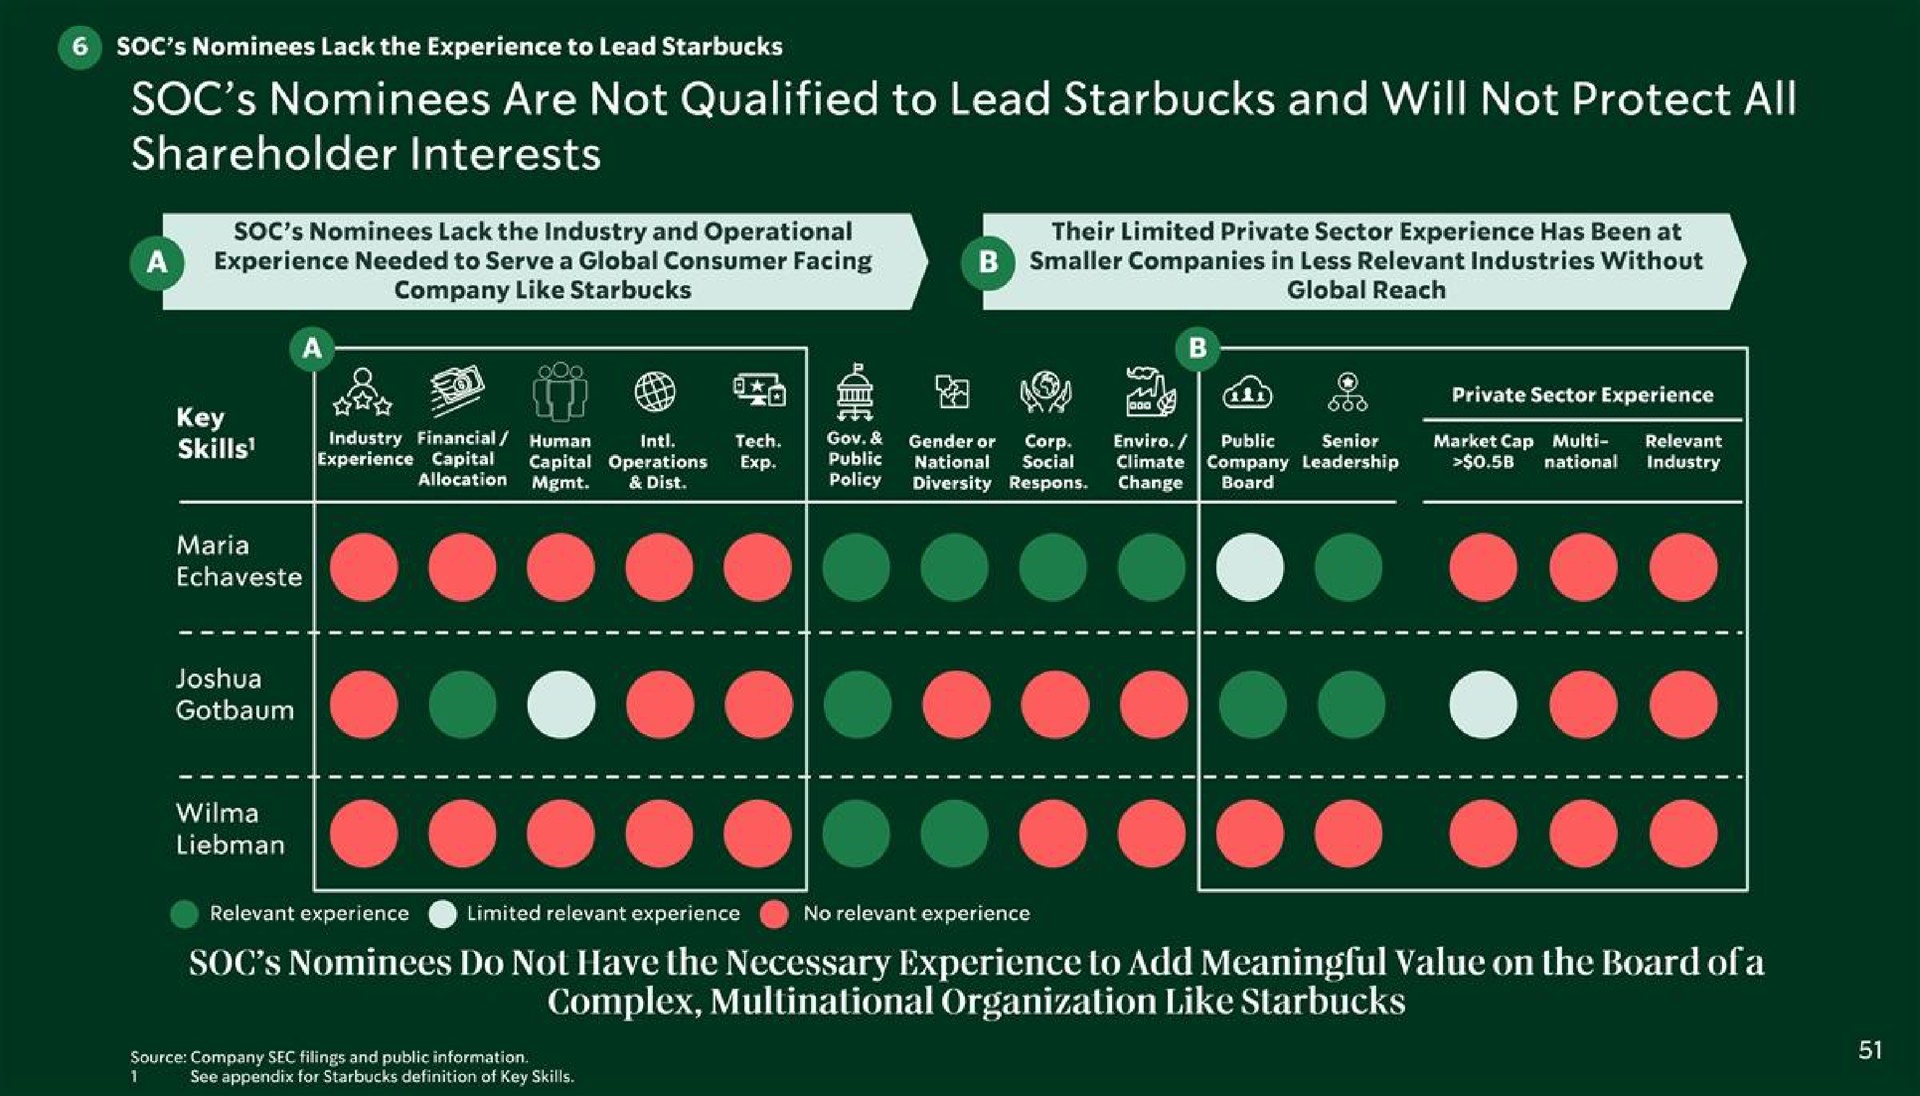 soc nominees are not qualified to lead and will not protect all shareholder interests a billed key soc nominees do not have the necessary experience to add meaningful value on the board complex multinational organization like | Starbucks